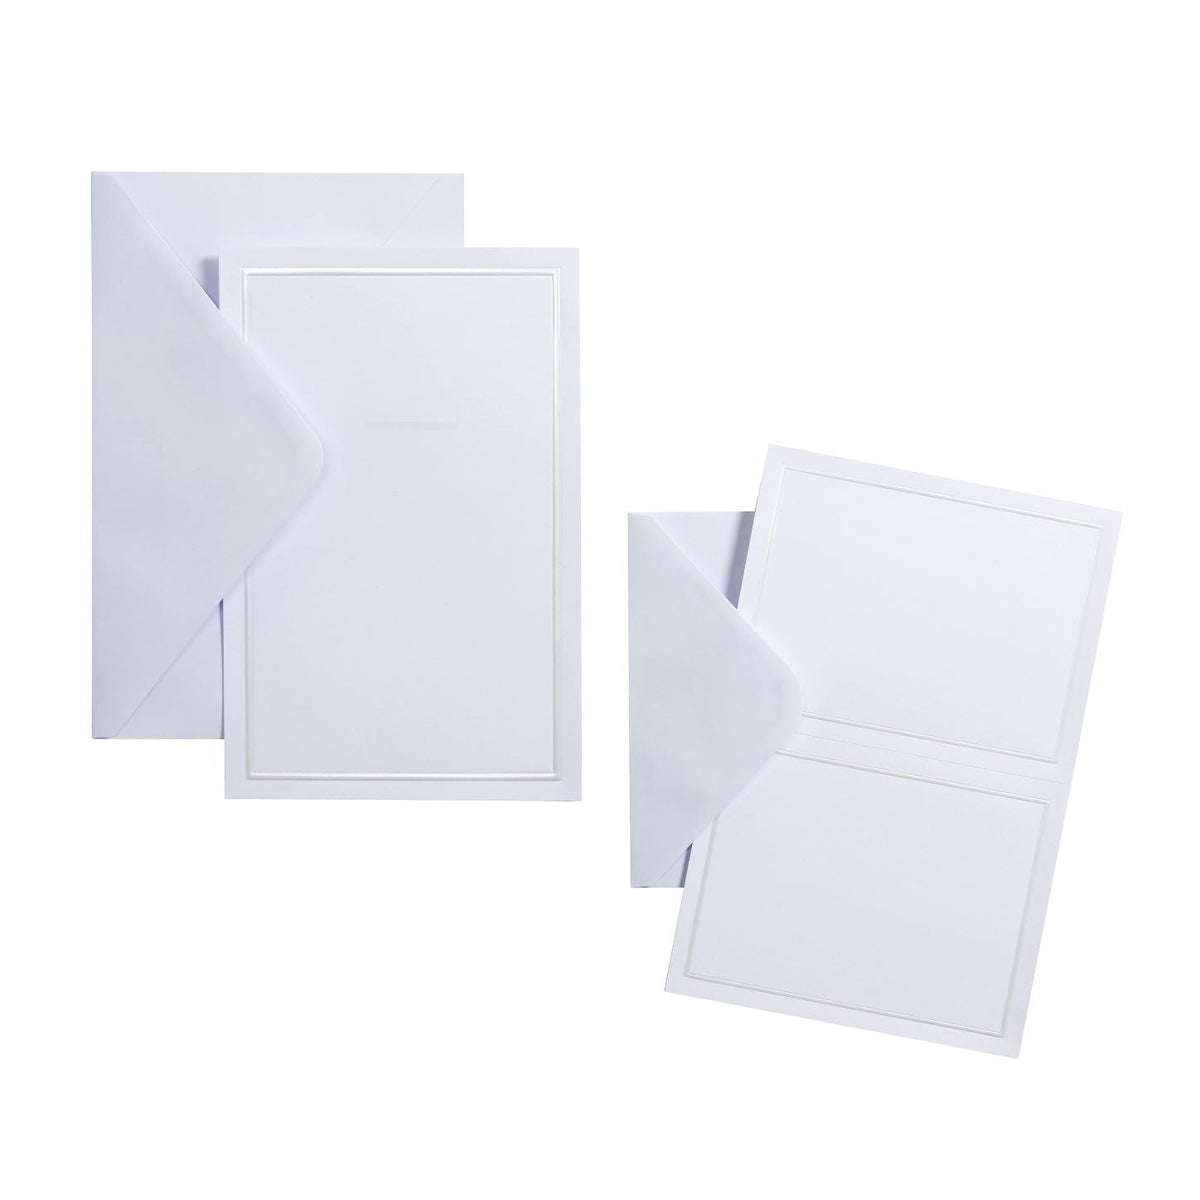 Ivory and Pearl Print At Home Invitations, Response Cards + All-Purpose Cards Kit Gartner Studios Invitations 97438